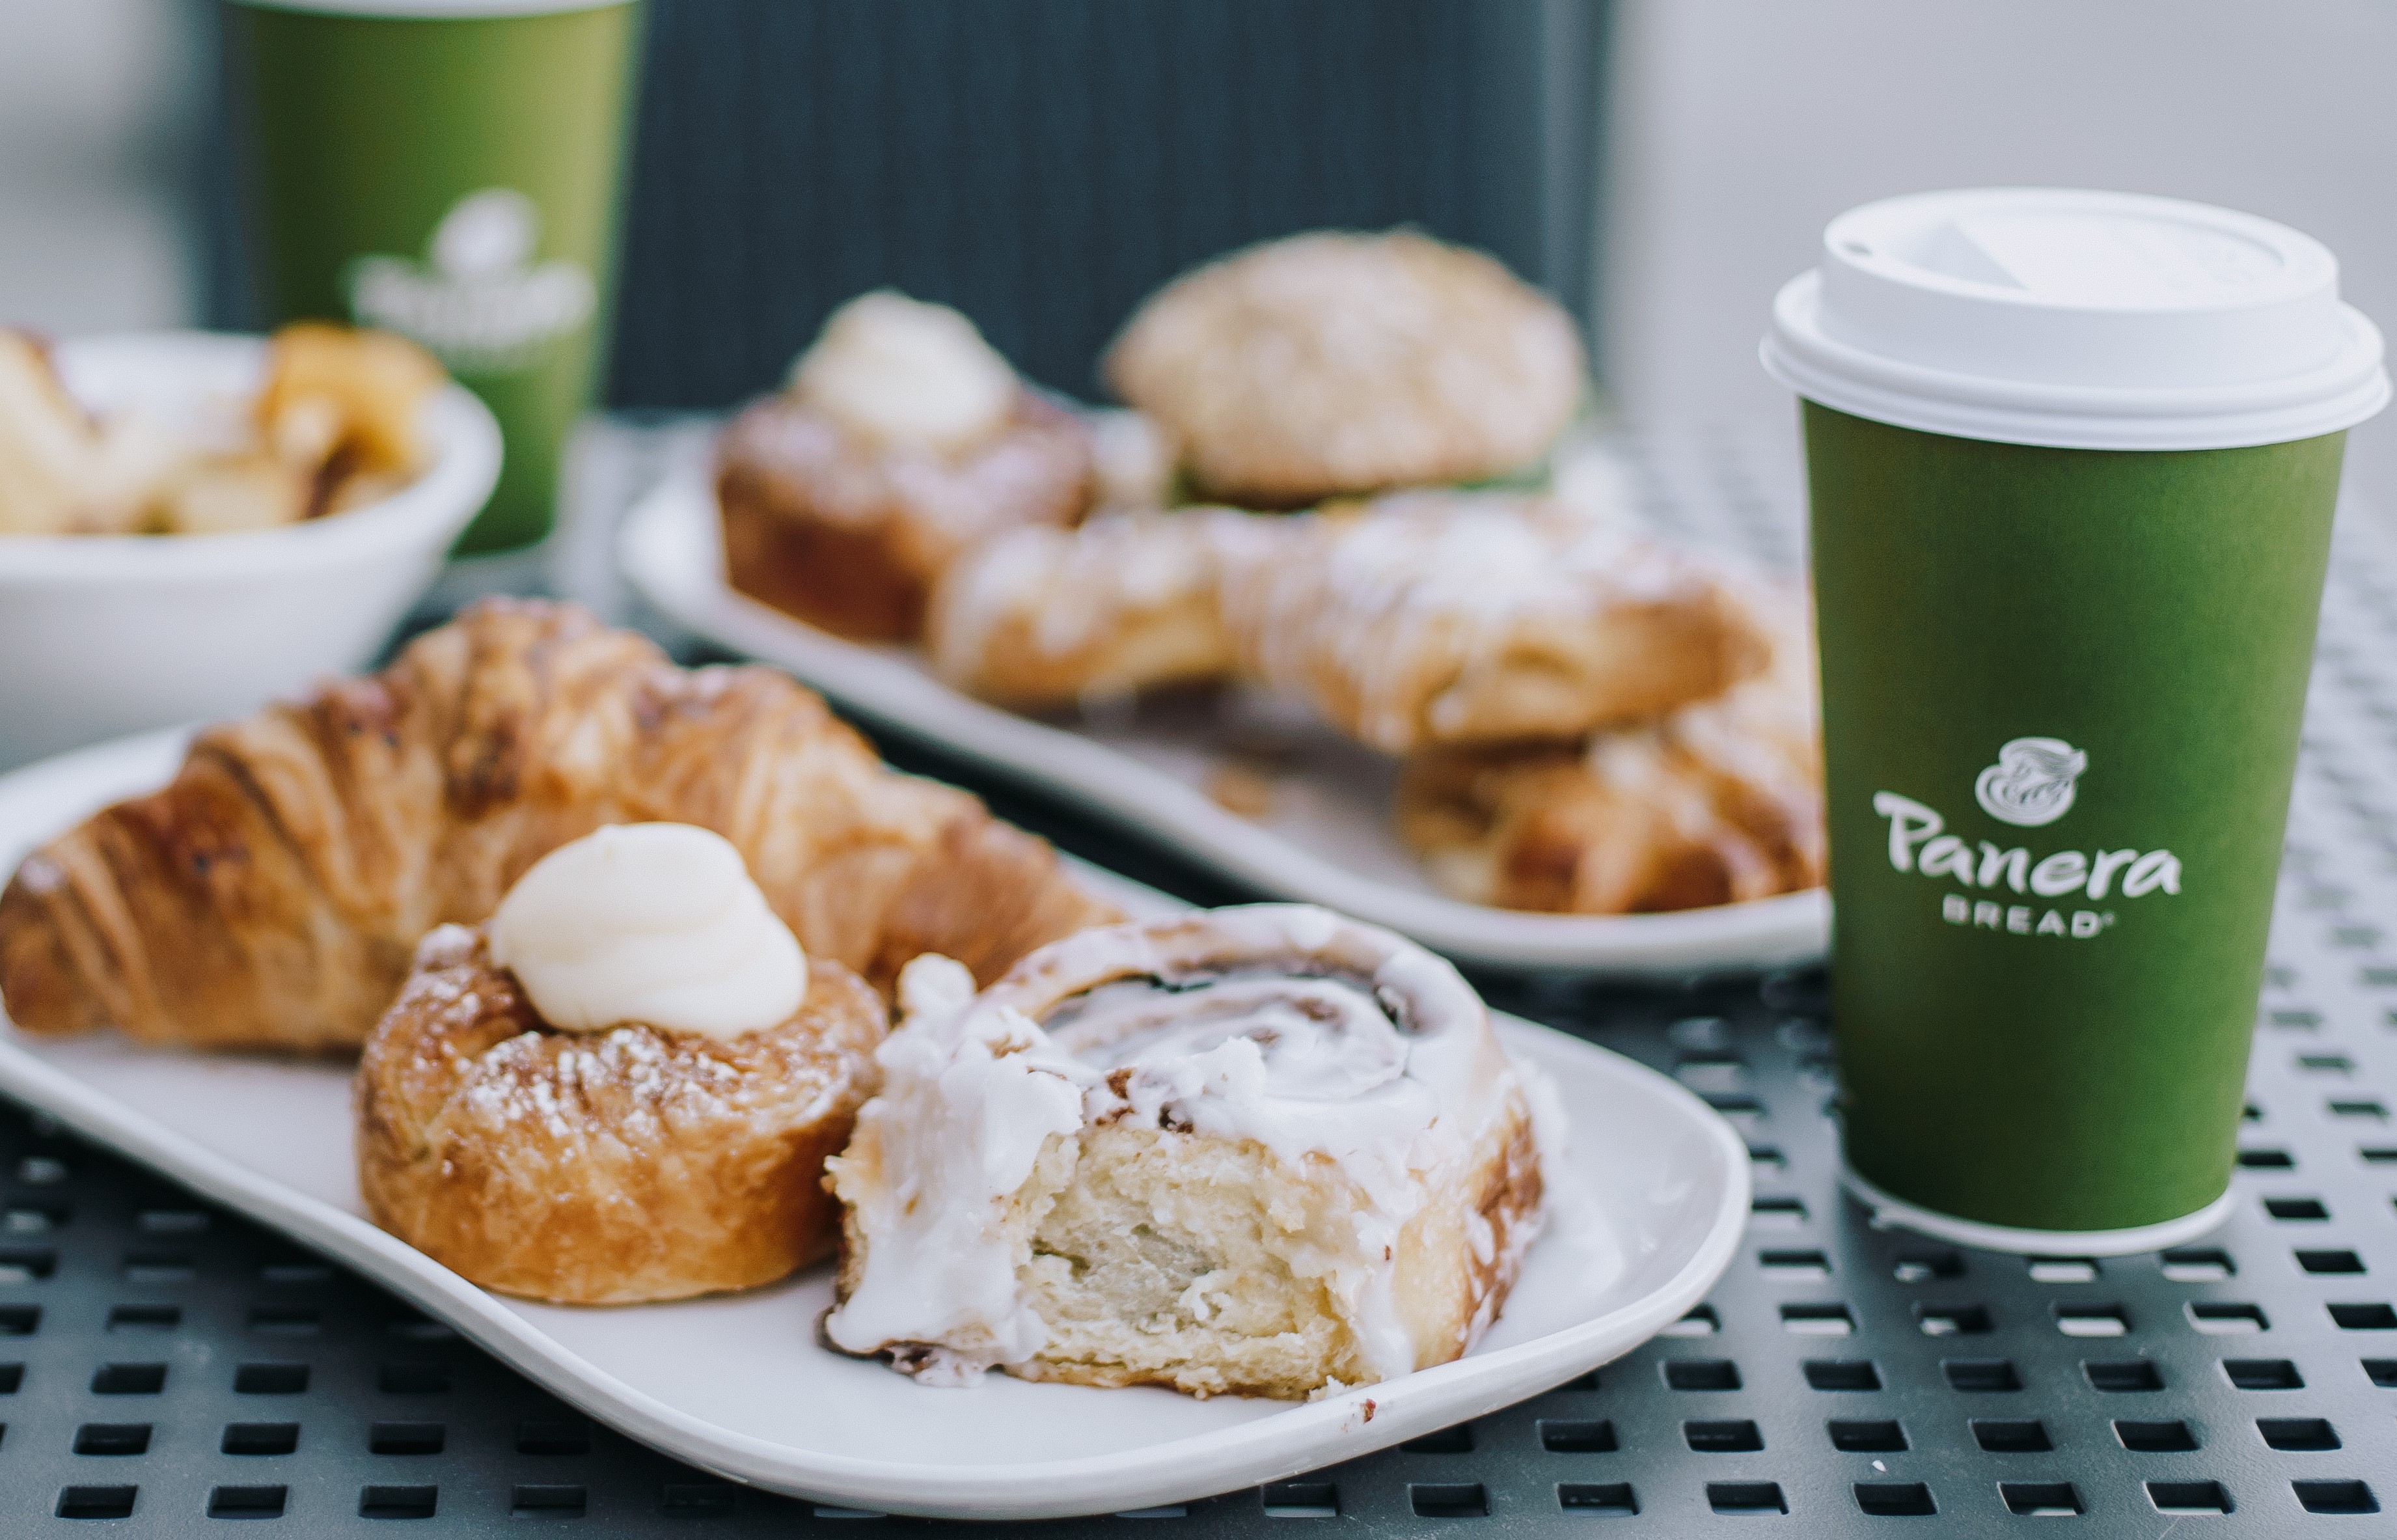 Panera Bread bakery-café to open in west El Paso next week with giveaways,  prizes